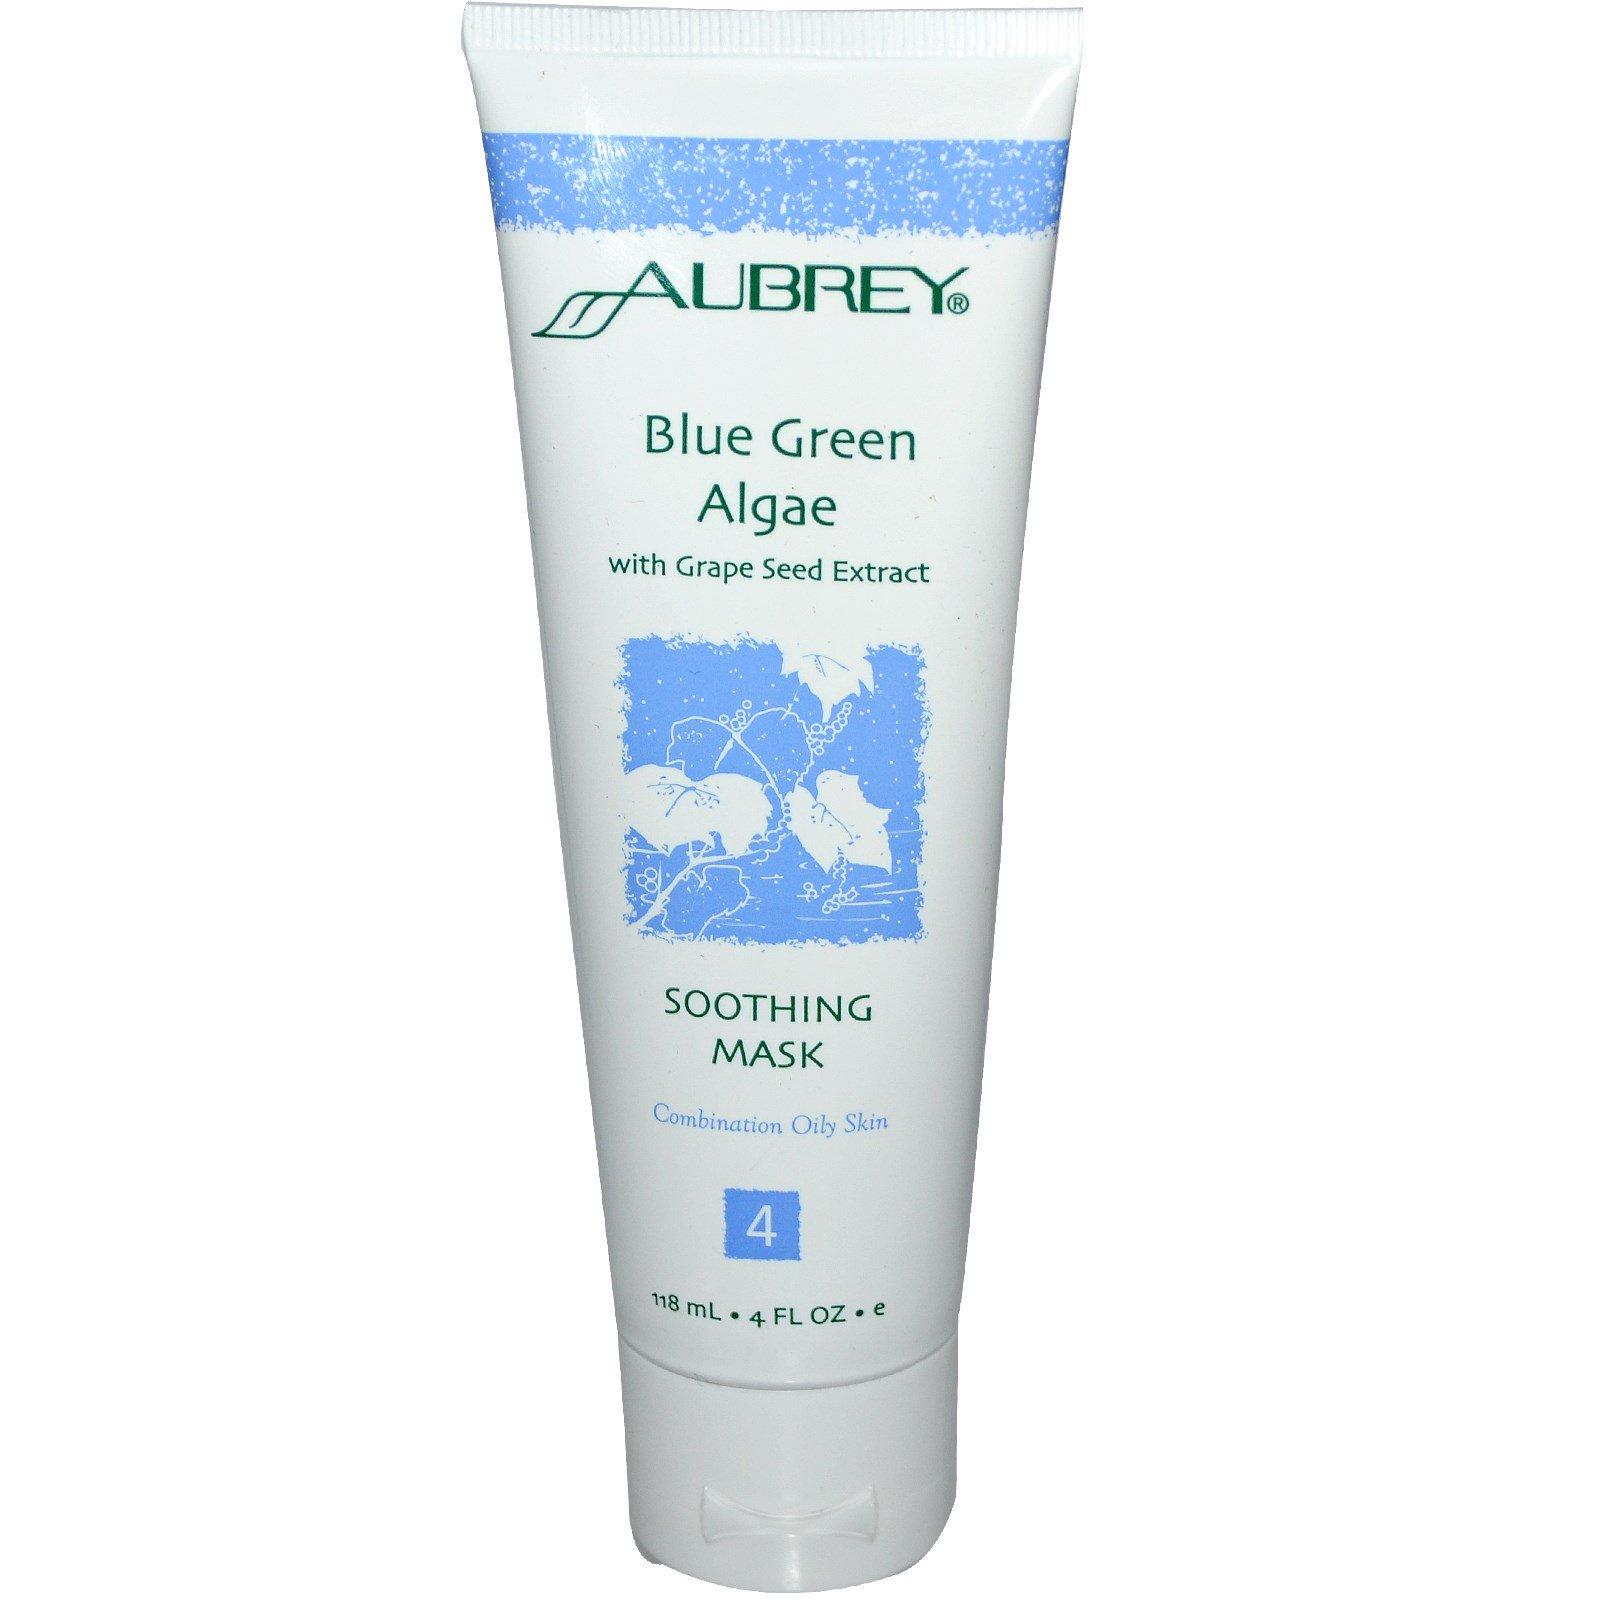 Blue Green Algae with Grape Seed Extract Soothing Mask, for Combination/Oily Skin